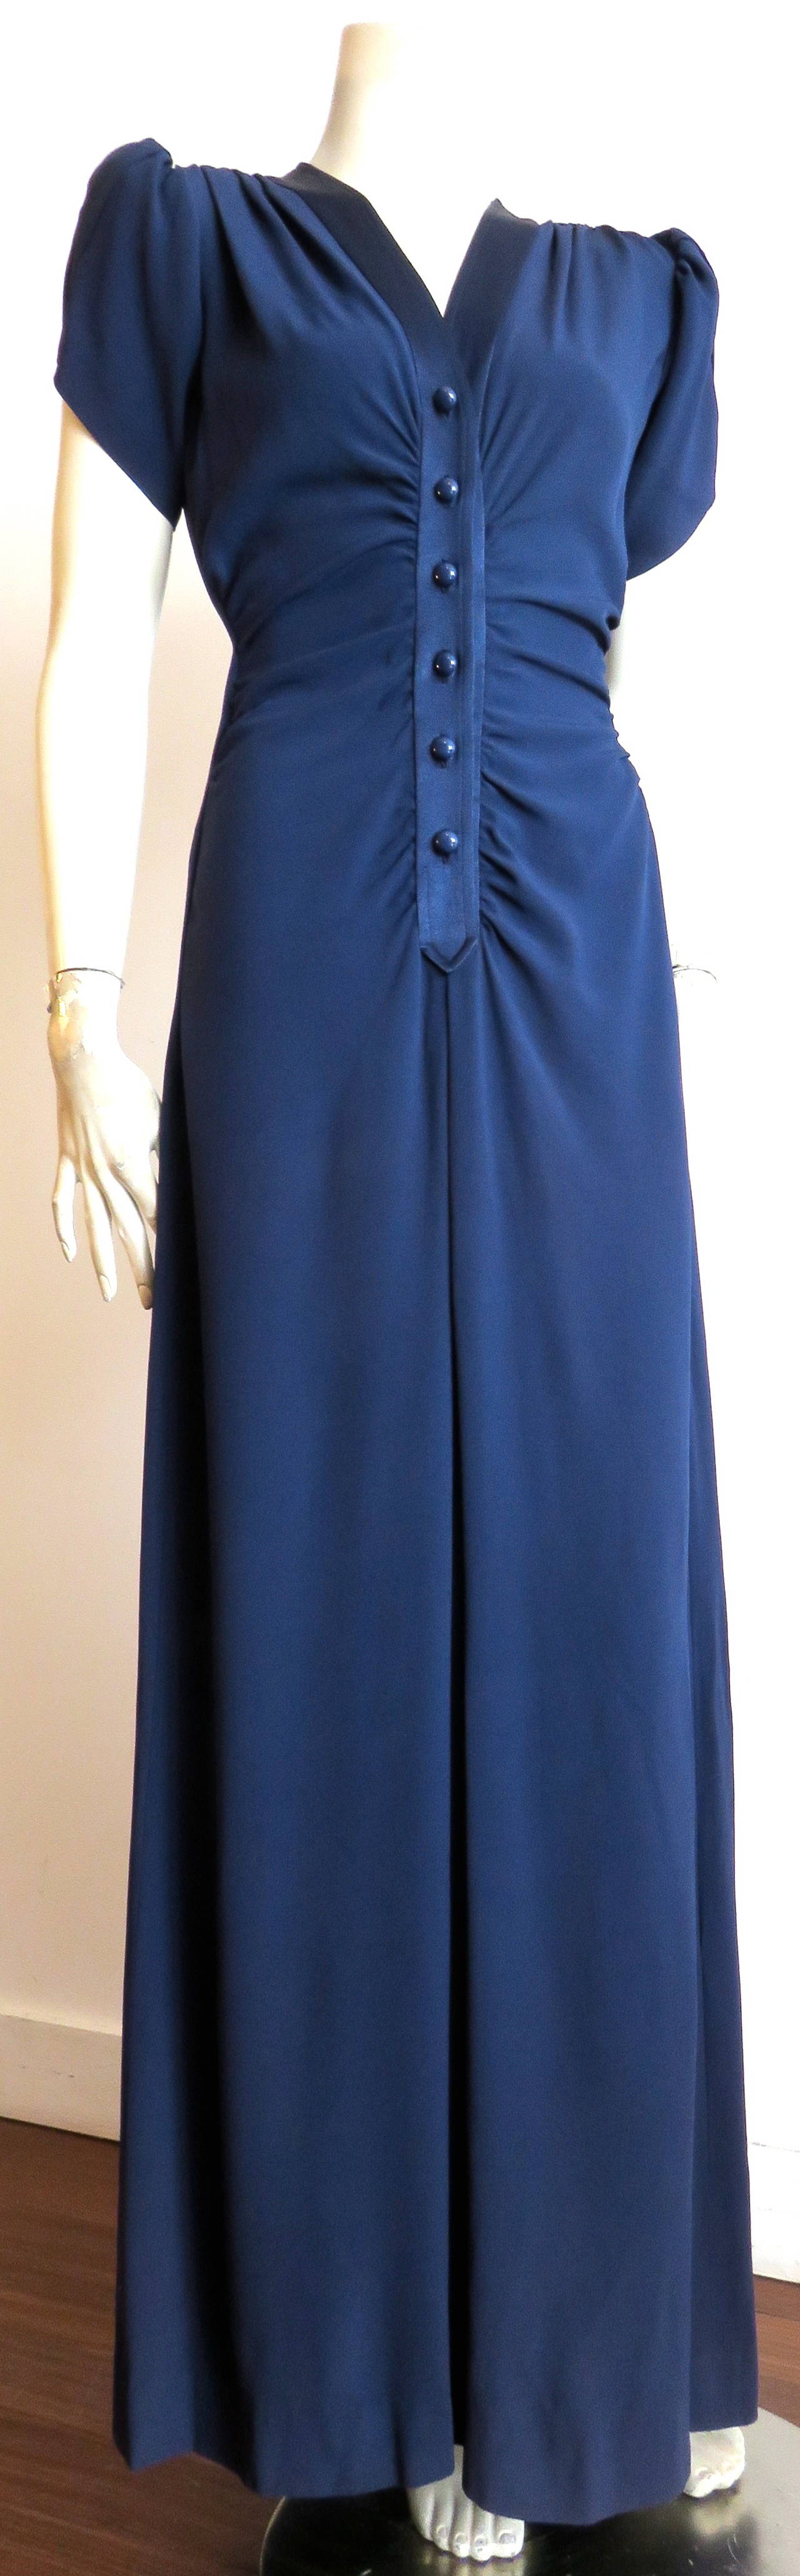 1983 YVES SAINT LAURENT 40's style blue crepe dress In Good Condition For Sale In Newport Beach, CA